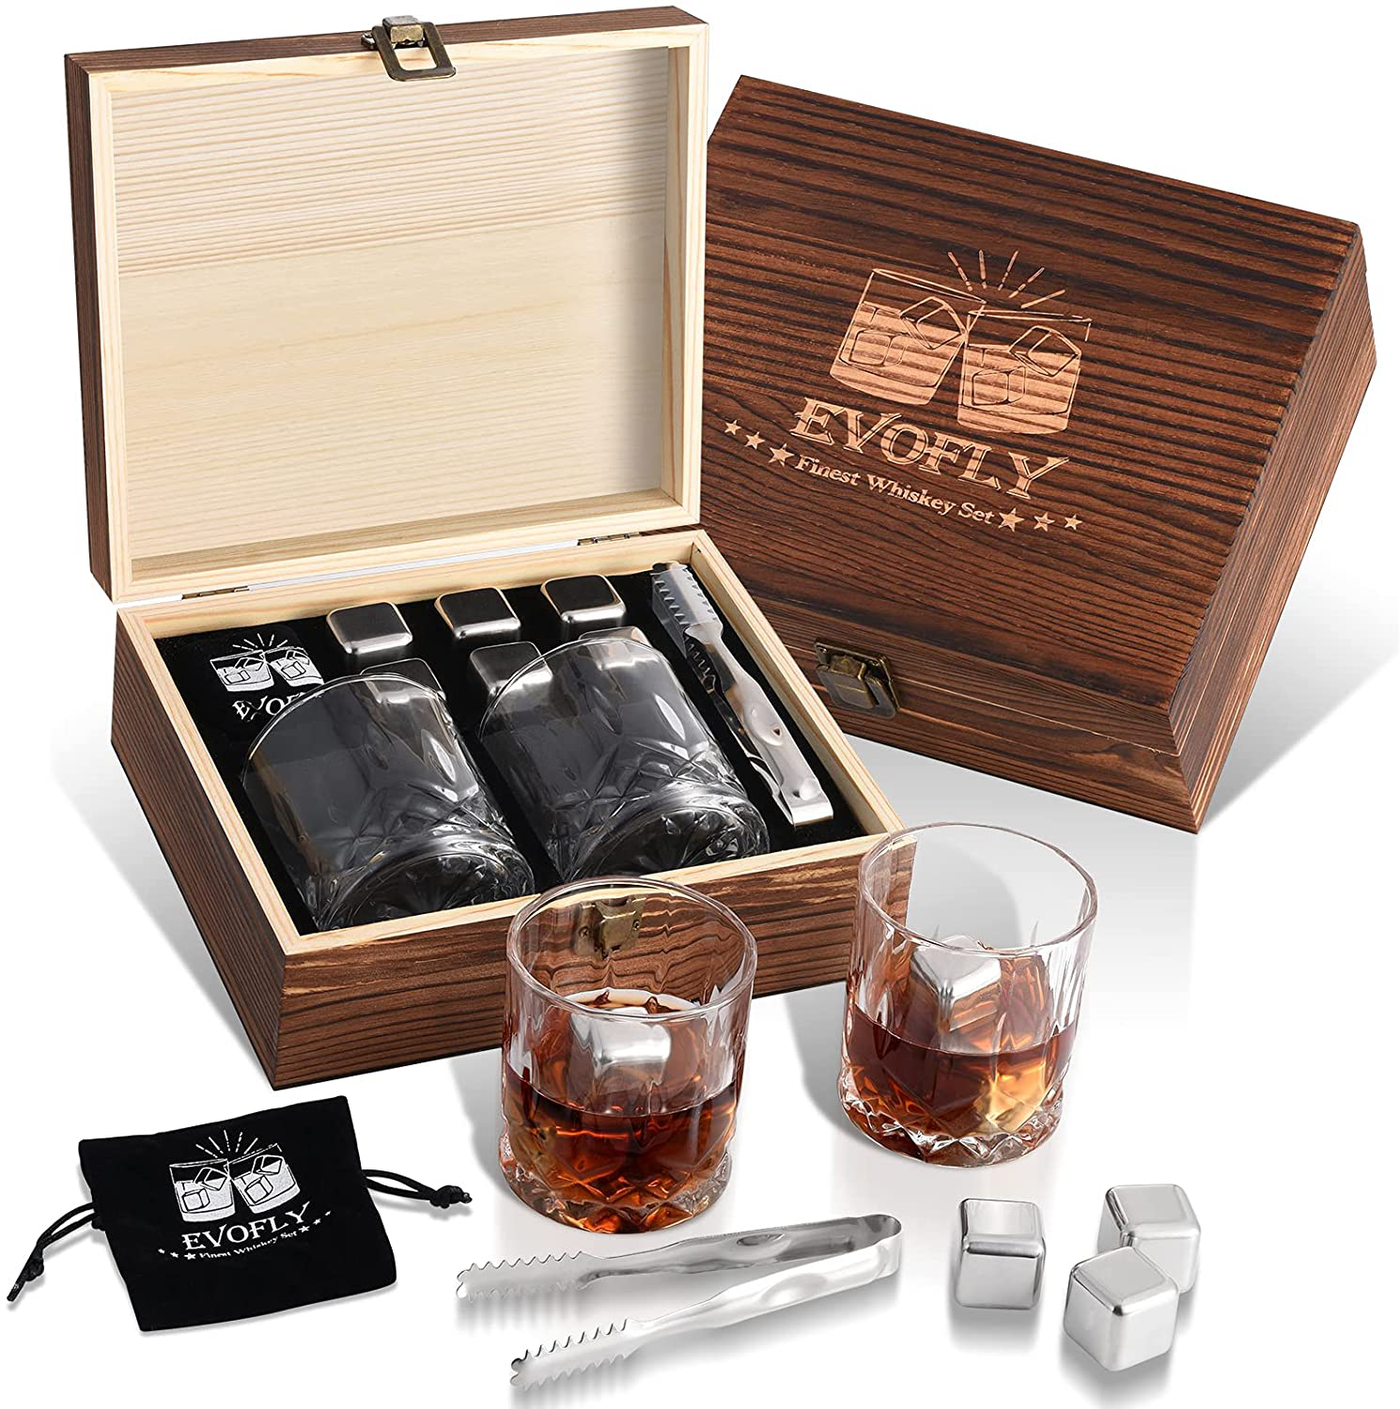 Birthday Gifts for Men Women, Whiskey Stones Set, Unique Anniversary Wedding Retirement Gift Ideas for Couple Dad Husband Boyfriend Him Grandpa, Man Cave Gifts Cool Gadgets for Alcohol Scotch Bourbon